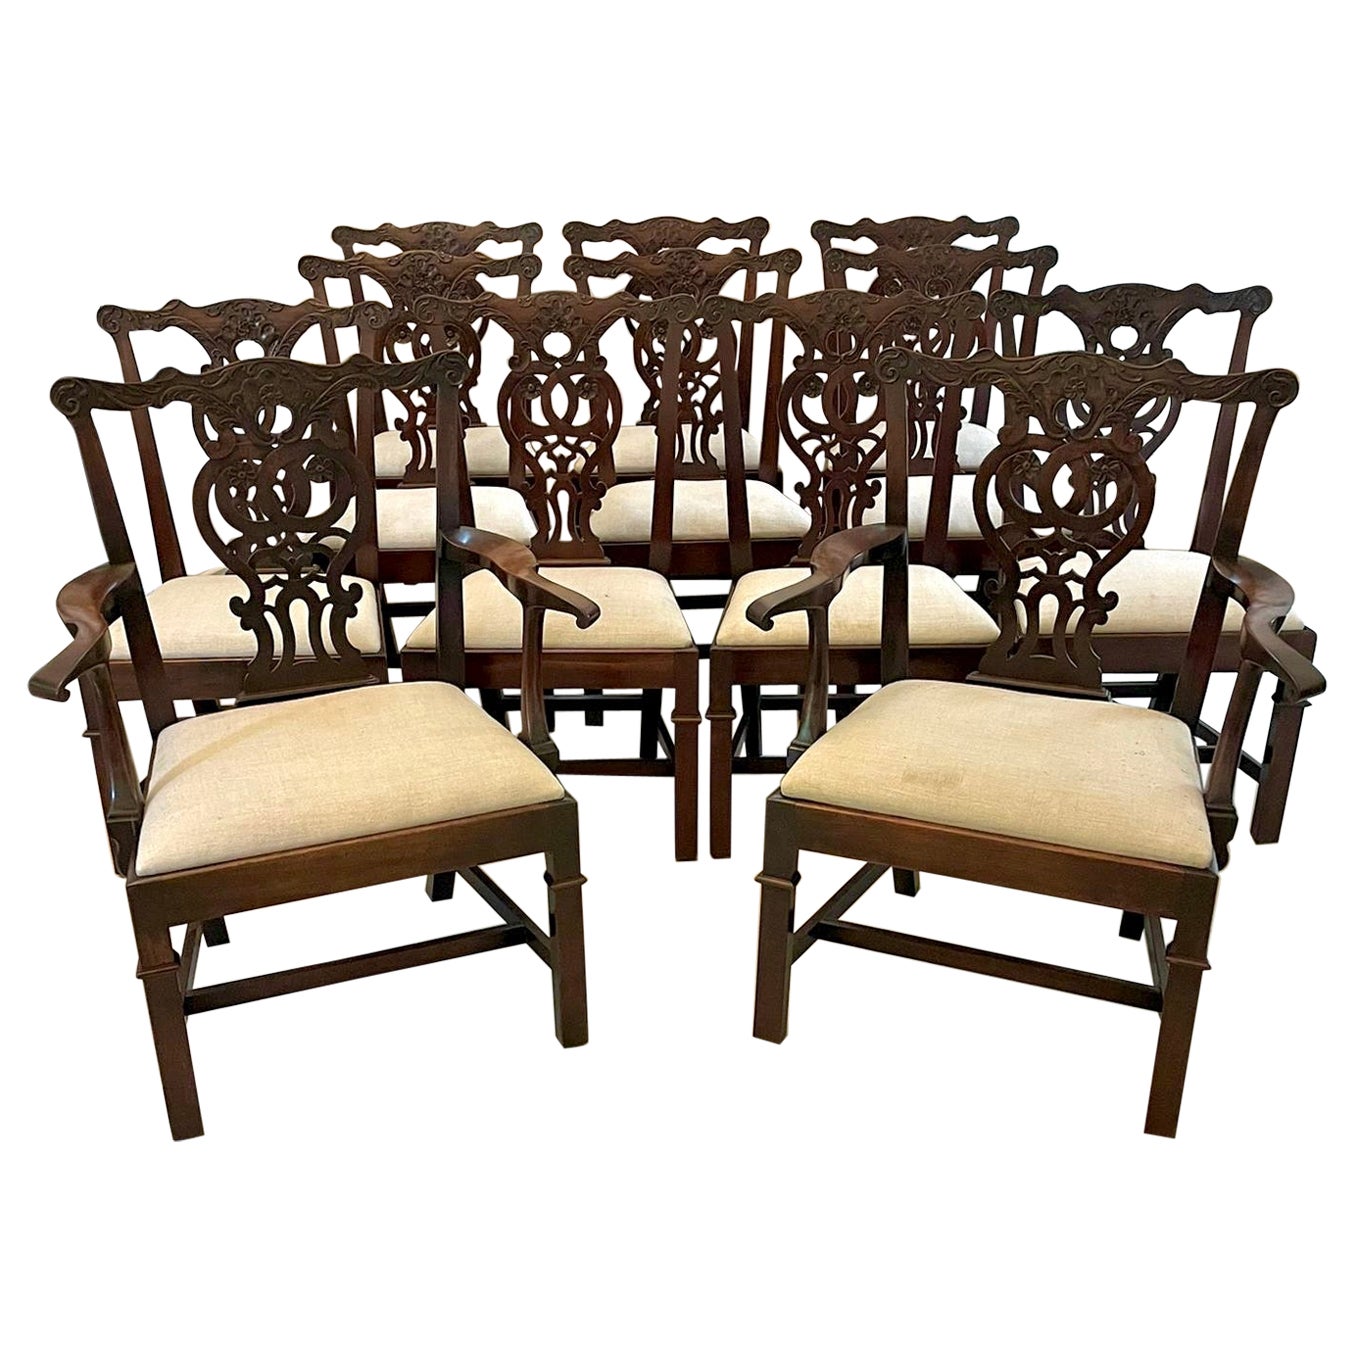 Set of 12 Antique 18th Century Quality Carved Mahogany Chippendale Chairs For Sale